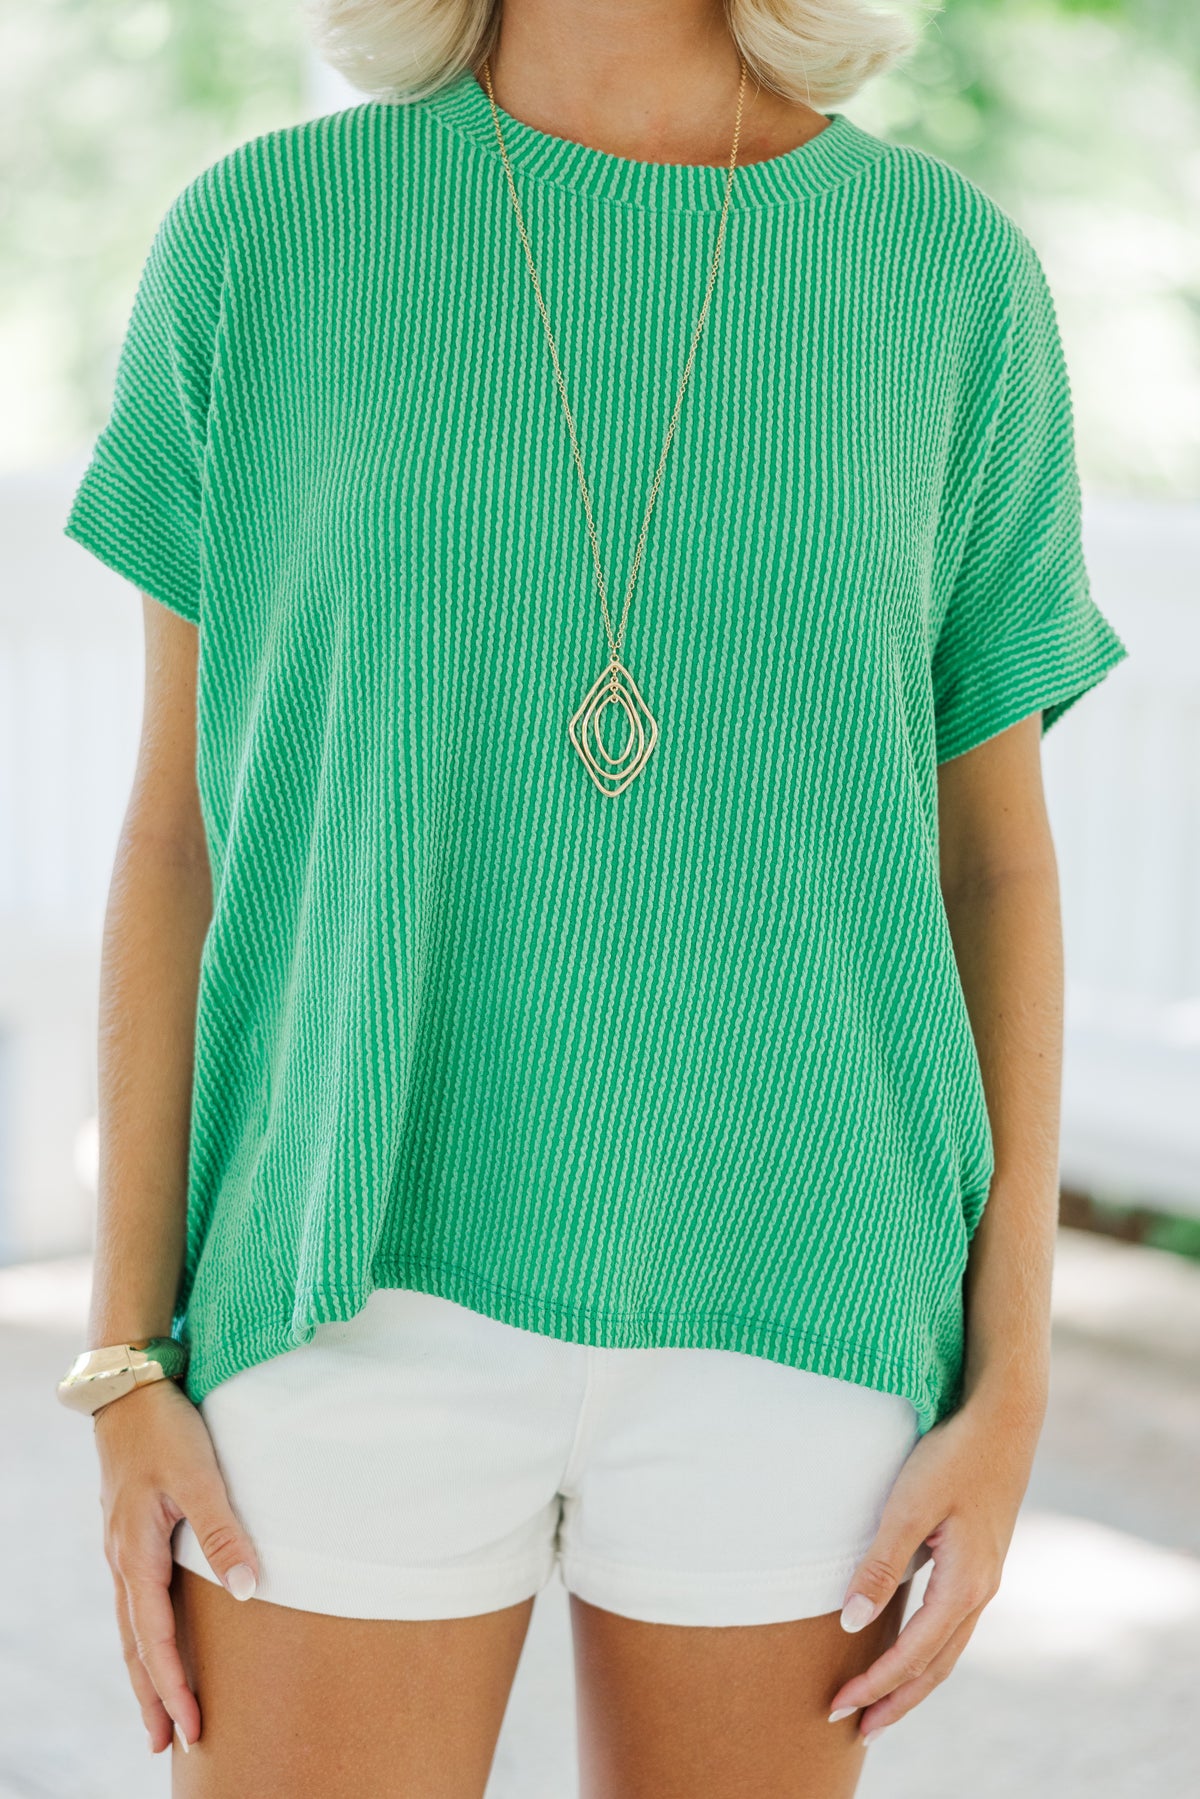 Catch On Kelly Green Ribbed Top – Shop the Mint